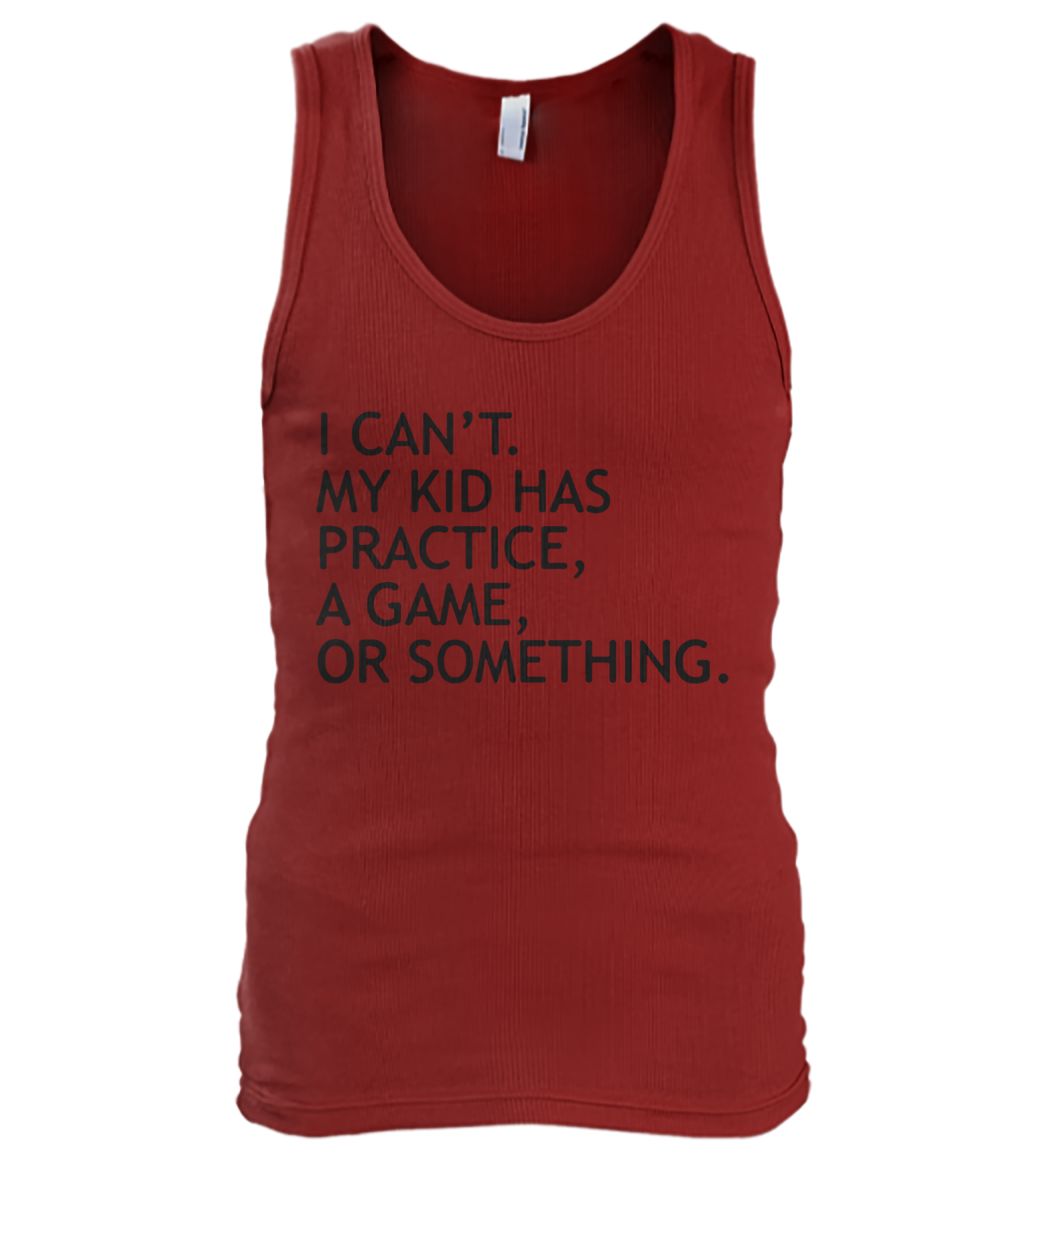 I can't my kid has practice a game or something men's tank top